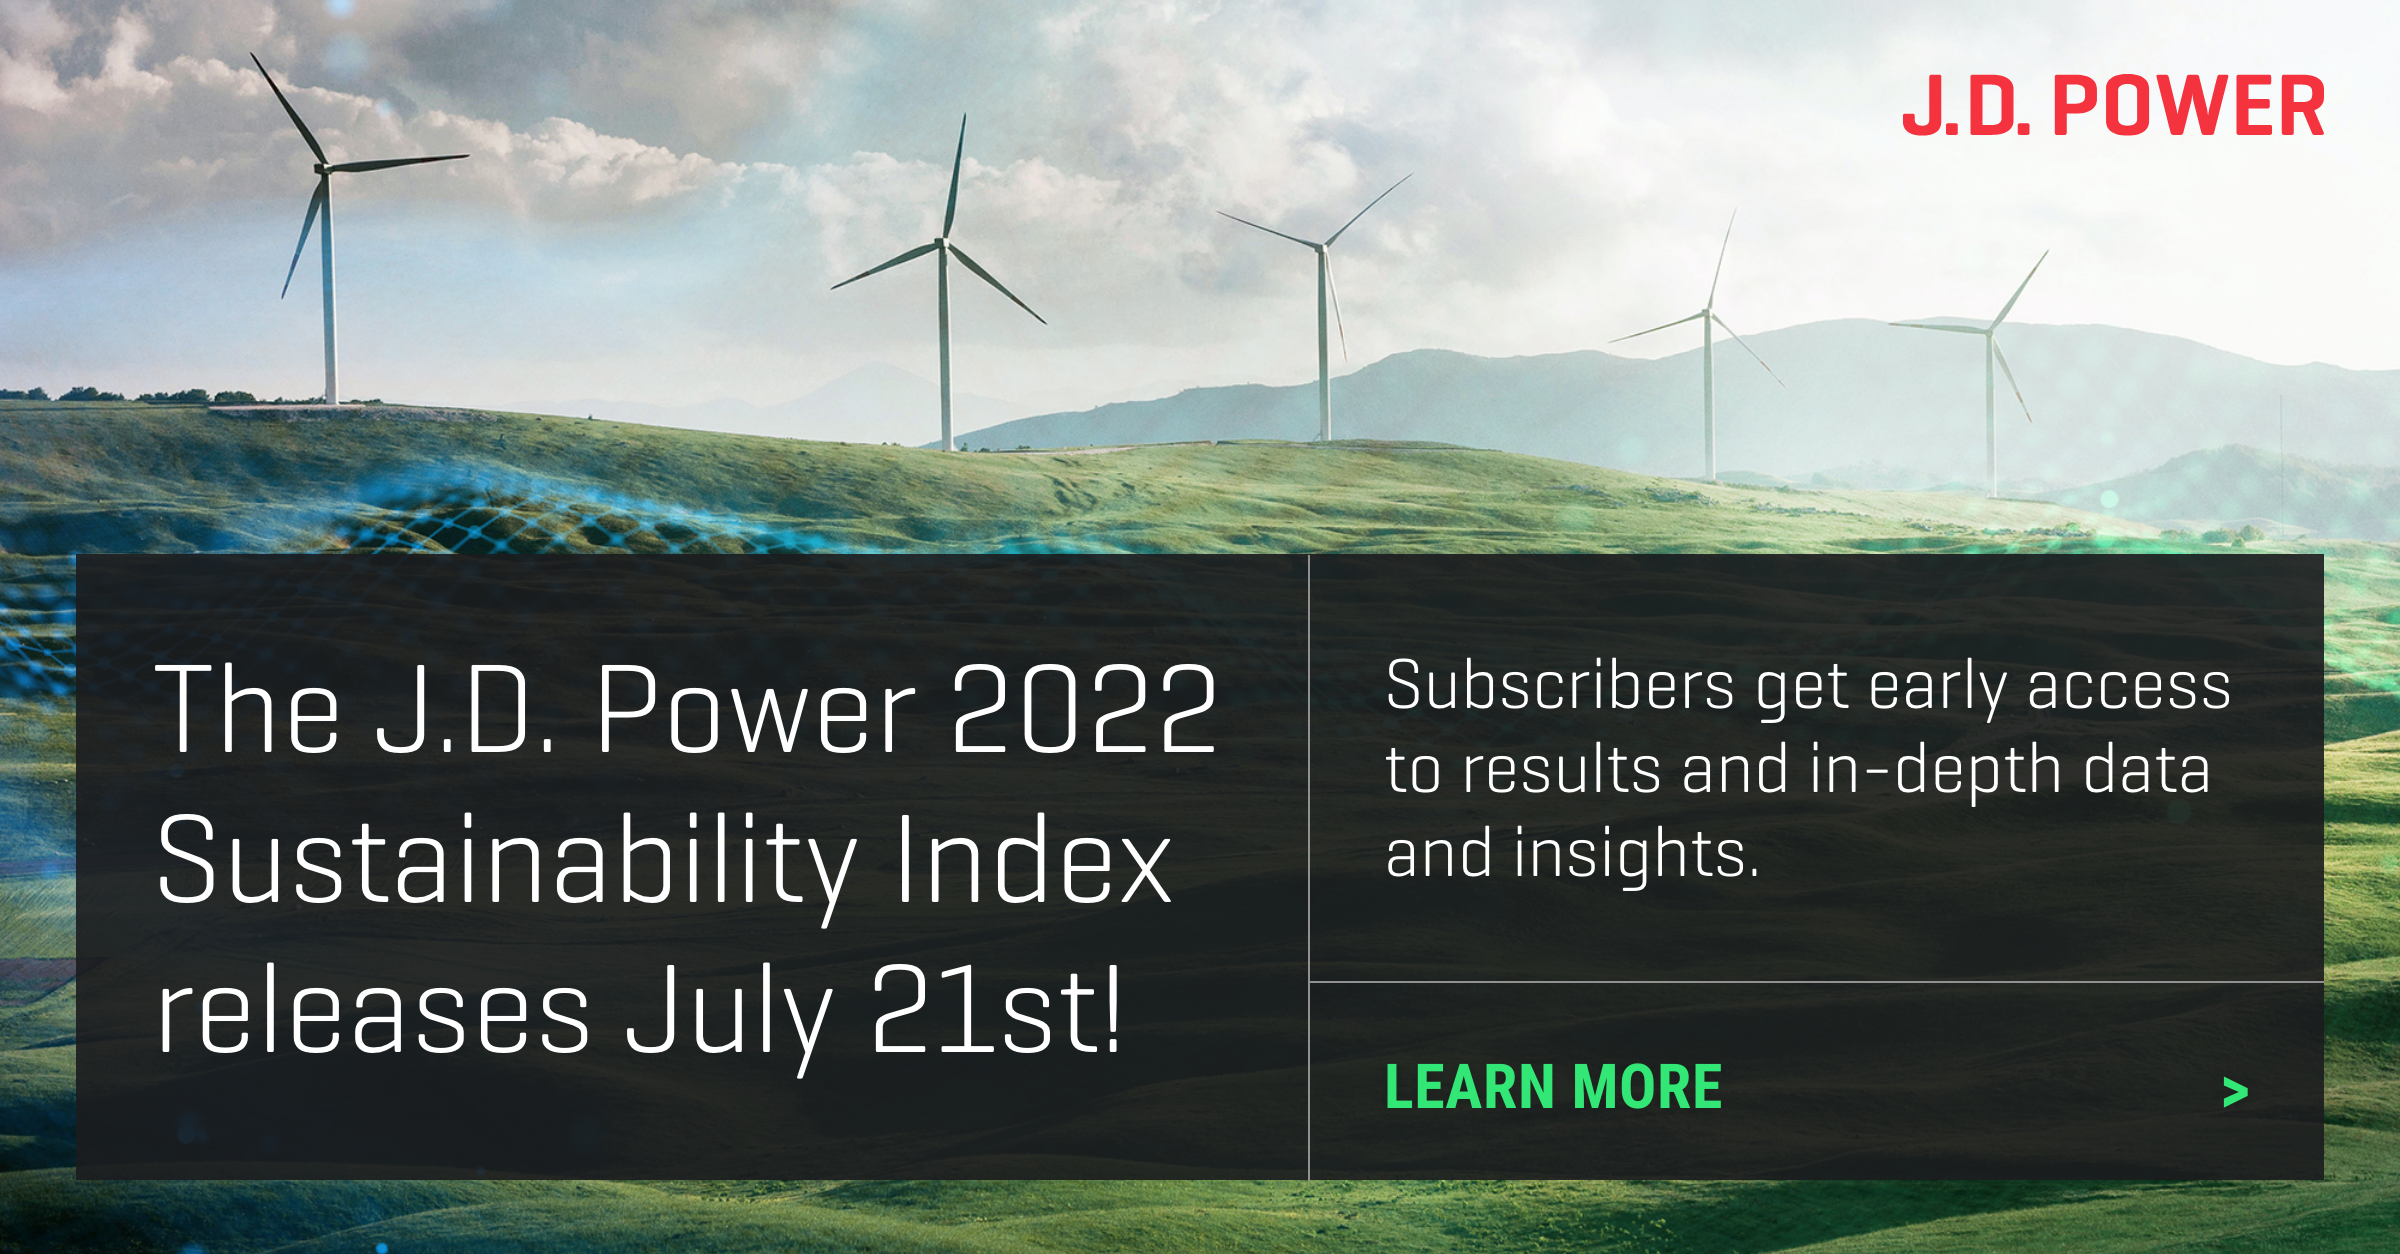 Sustainability Index releases July 21st